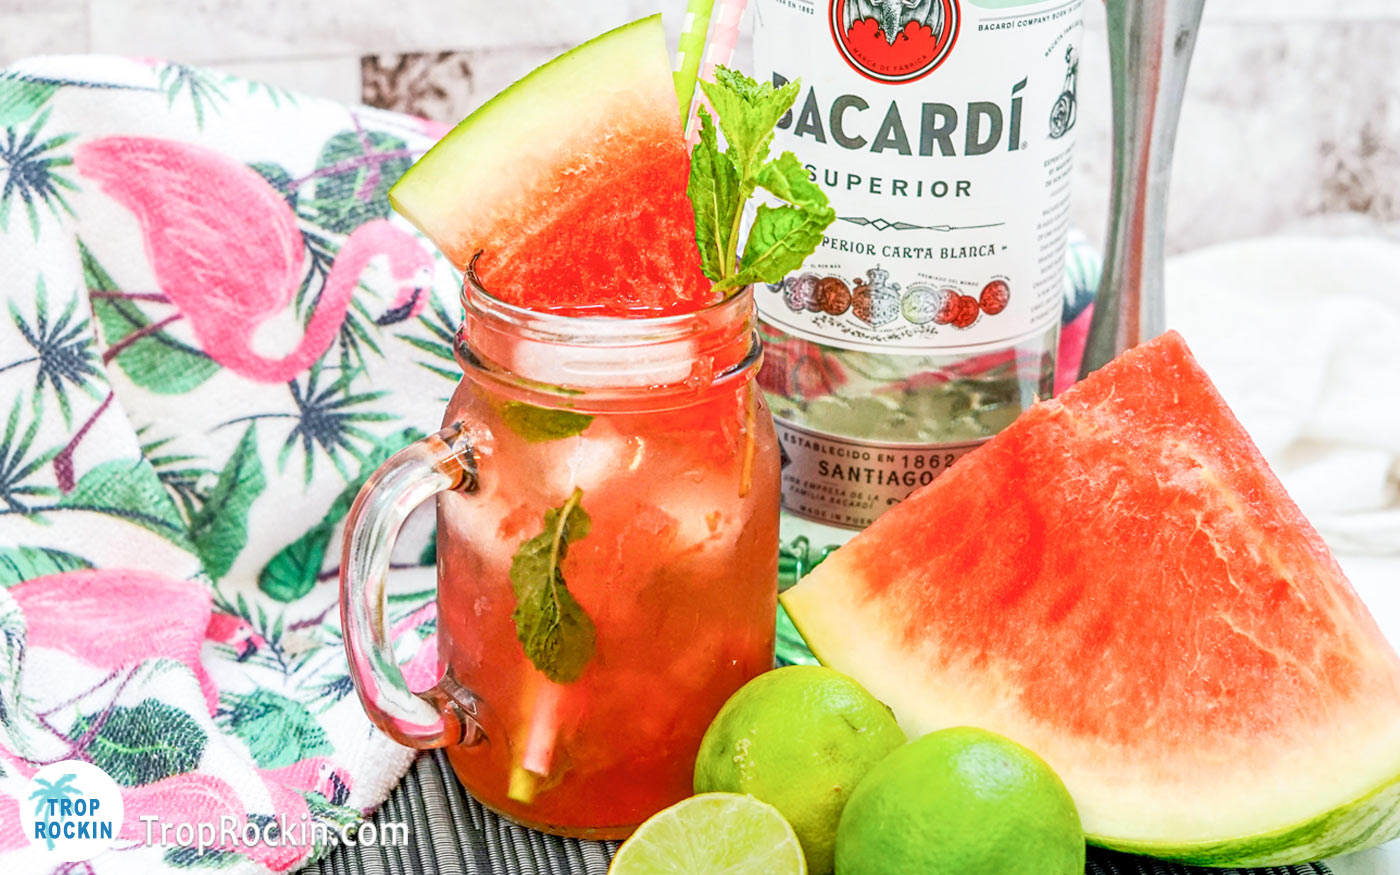 Watermelon Mojito with a sprig of mint and watermelon wedge for garnish in a mason jar. A bottle of Bacardi Rum in the background with several limes and a large watermelon slice.